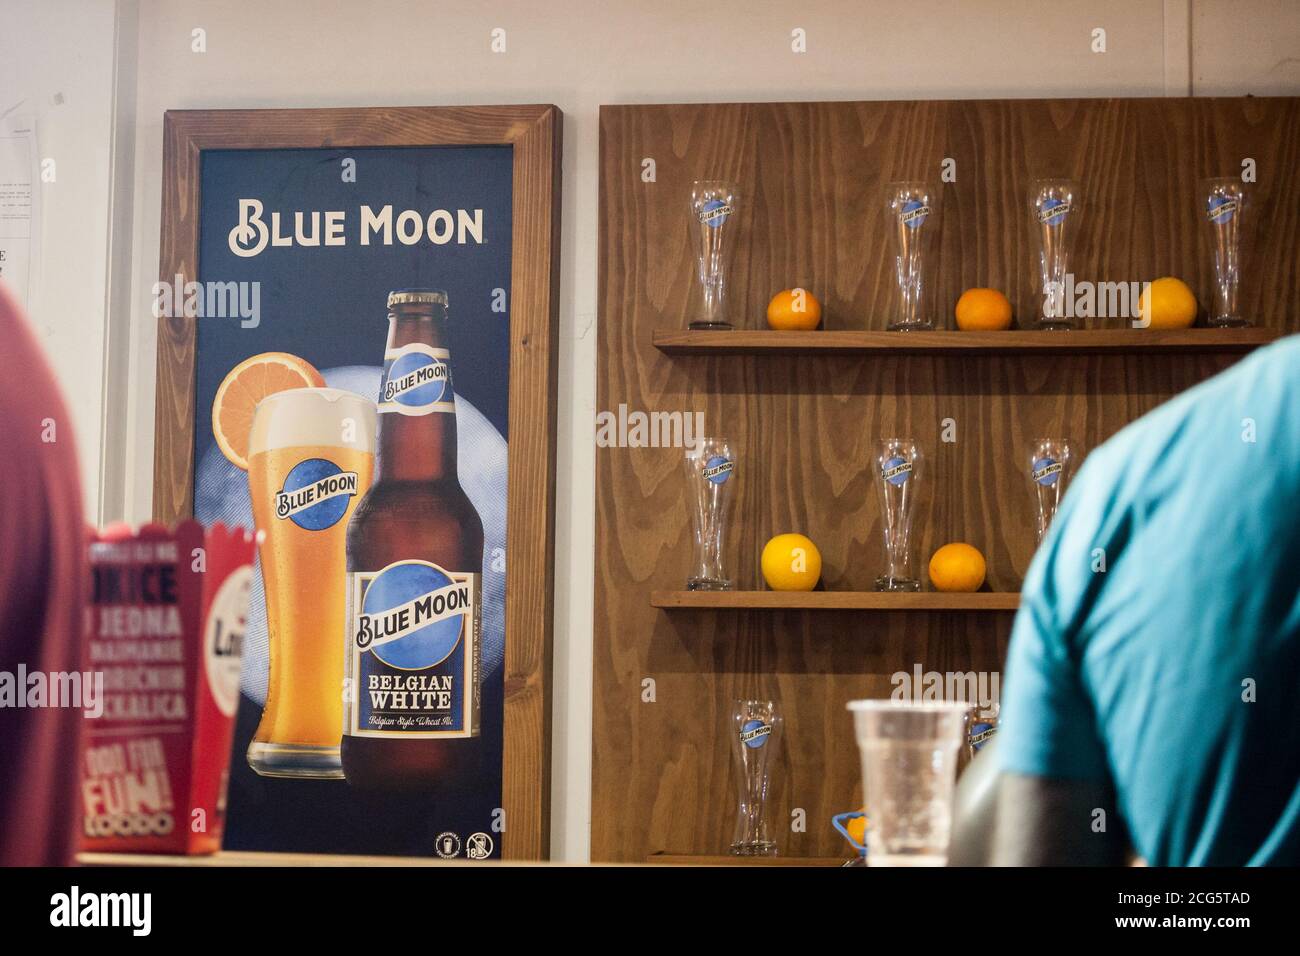 BELGRADE, SERBIA - AUGUST 26, 2020: Blue Moon Beer logo in a bar in Belgrade. Blue Moon is a belgian style wheat beer produced in Colorado owned by Mi Stock Photo